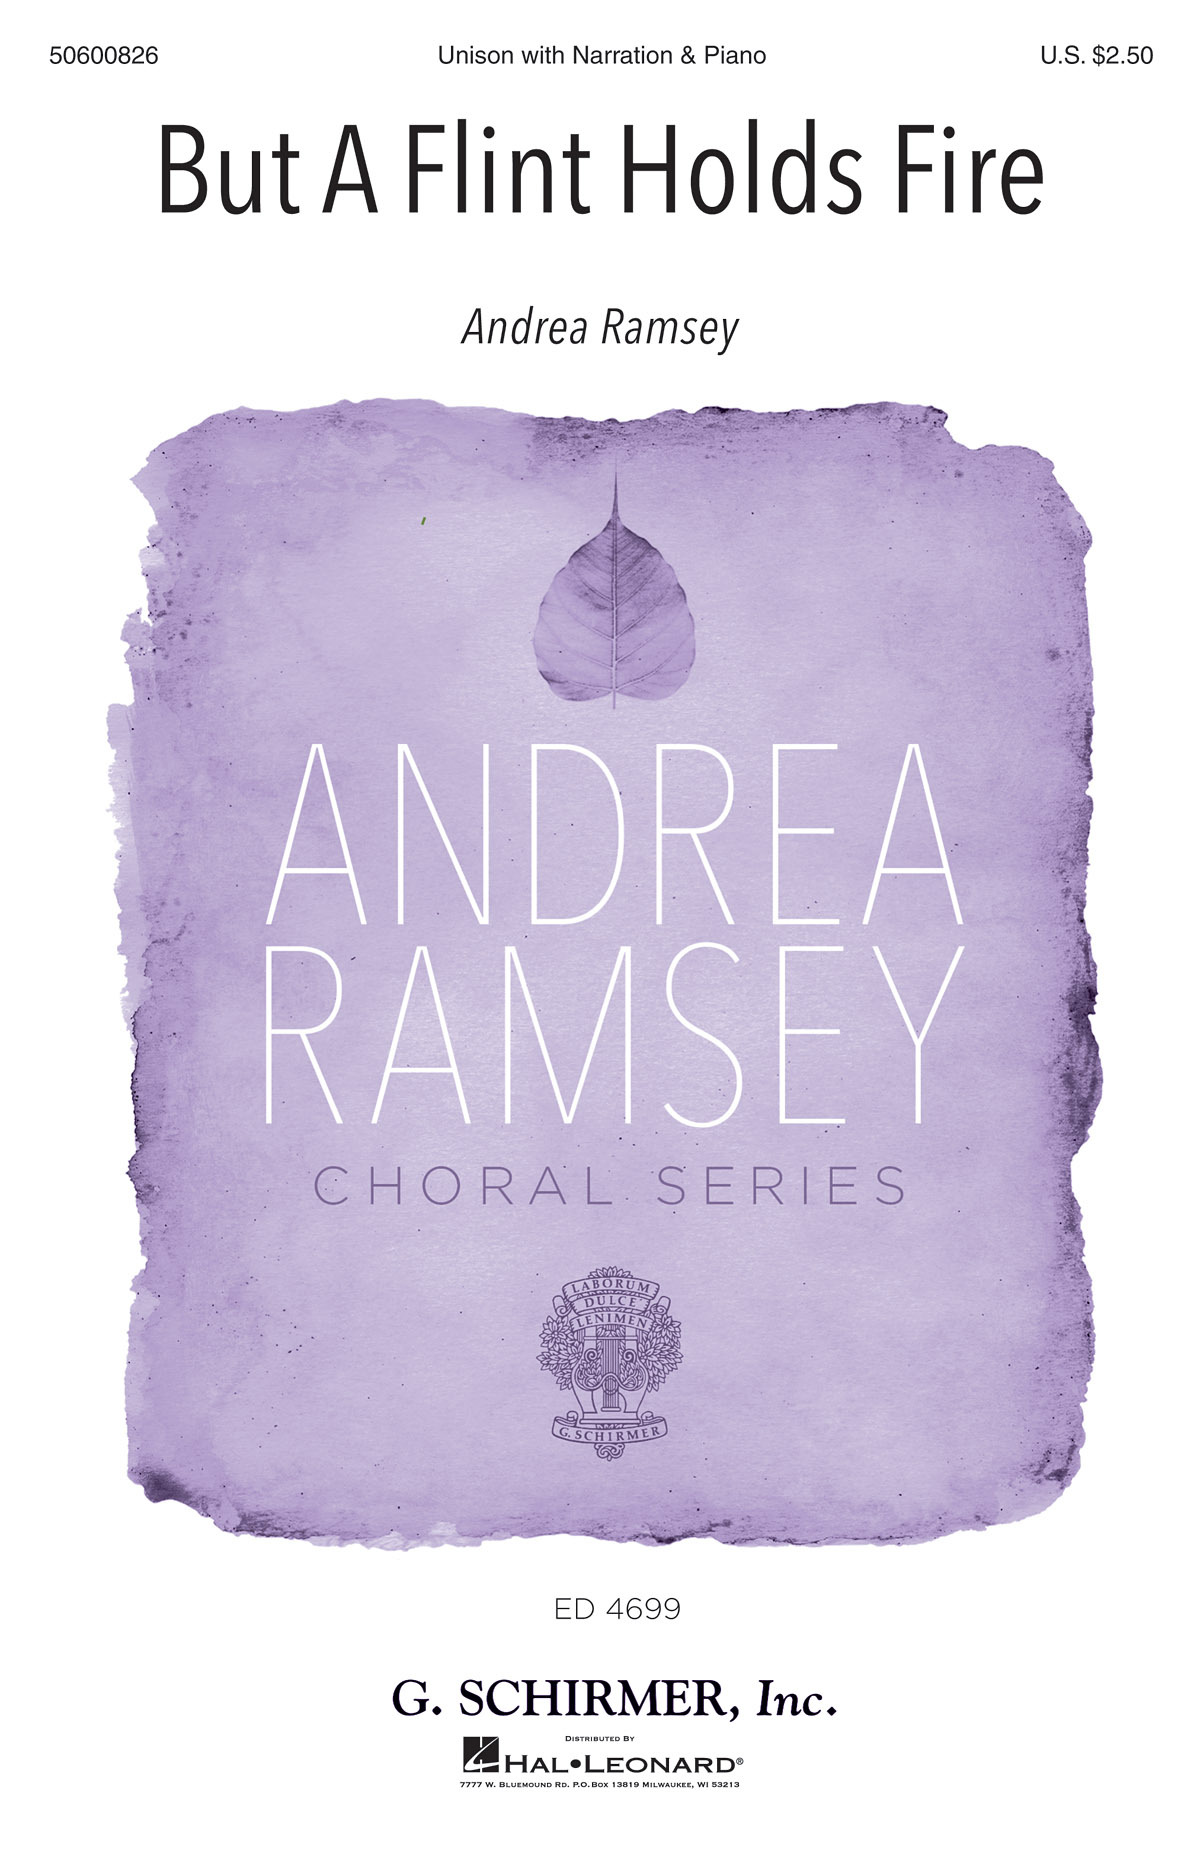 Andrea Ramsey: But a Flint Holds fuere